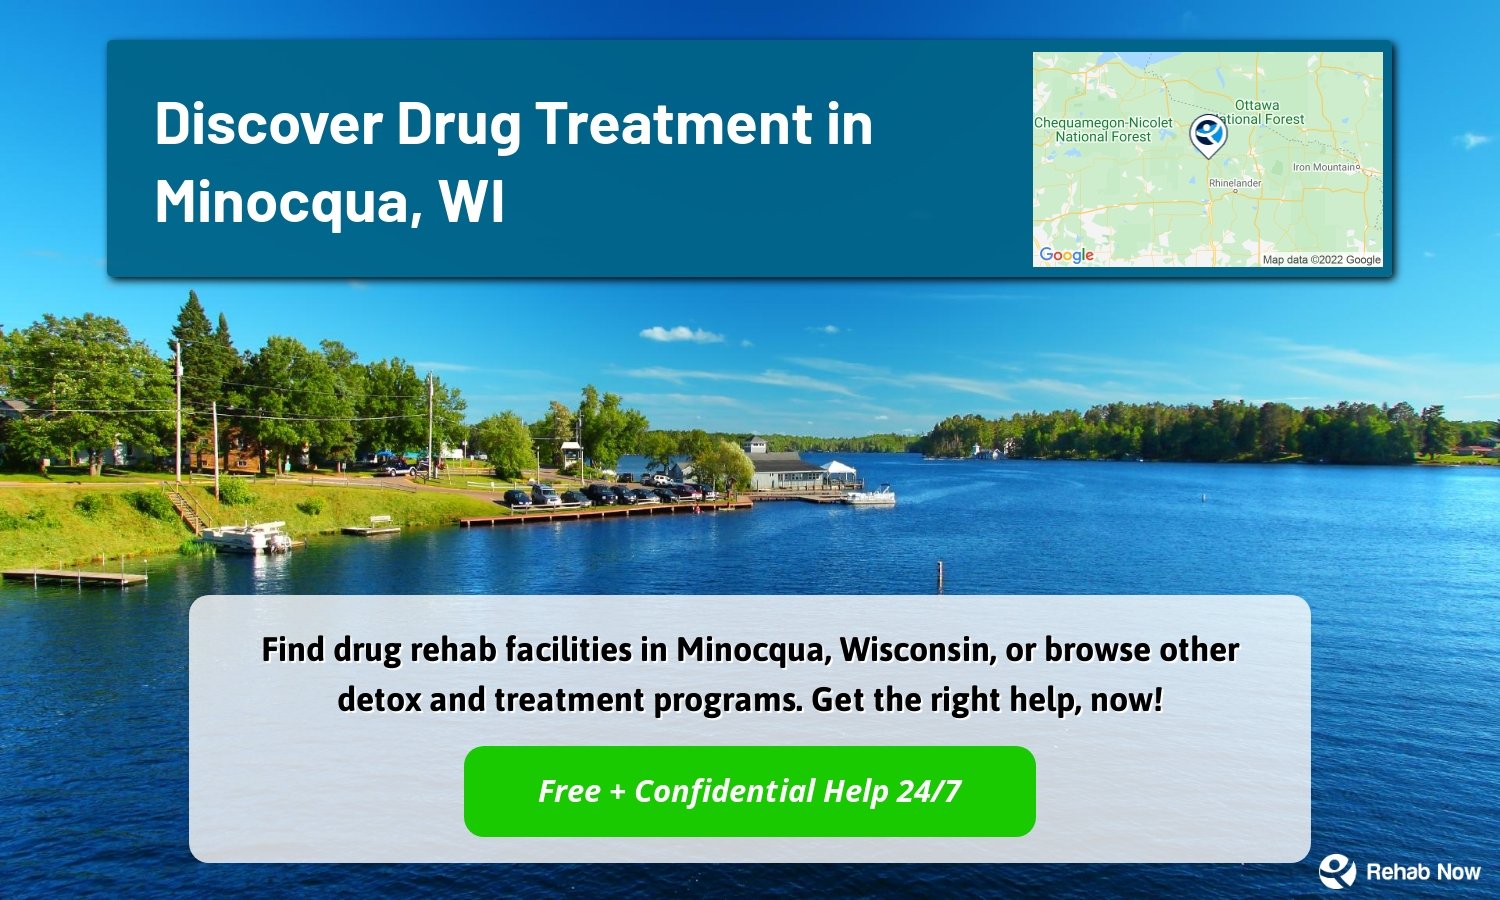 Find drug rehab facilities in Minocqua, Wisconsin, or browse other detox and treatment programs. Get the right help, now!